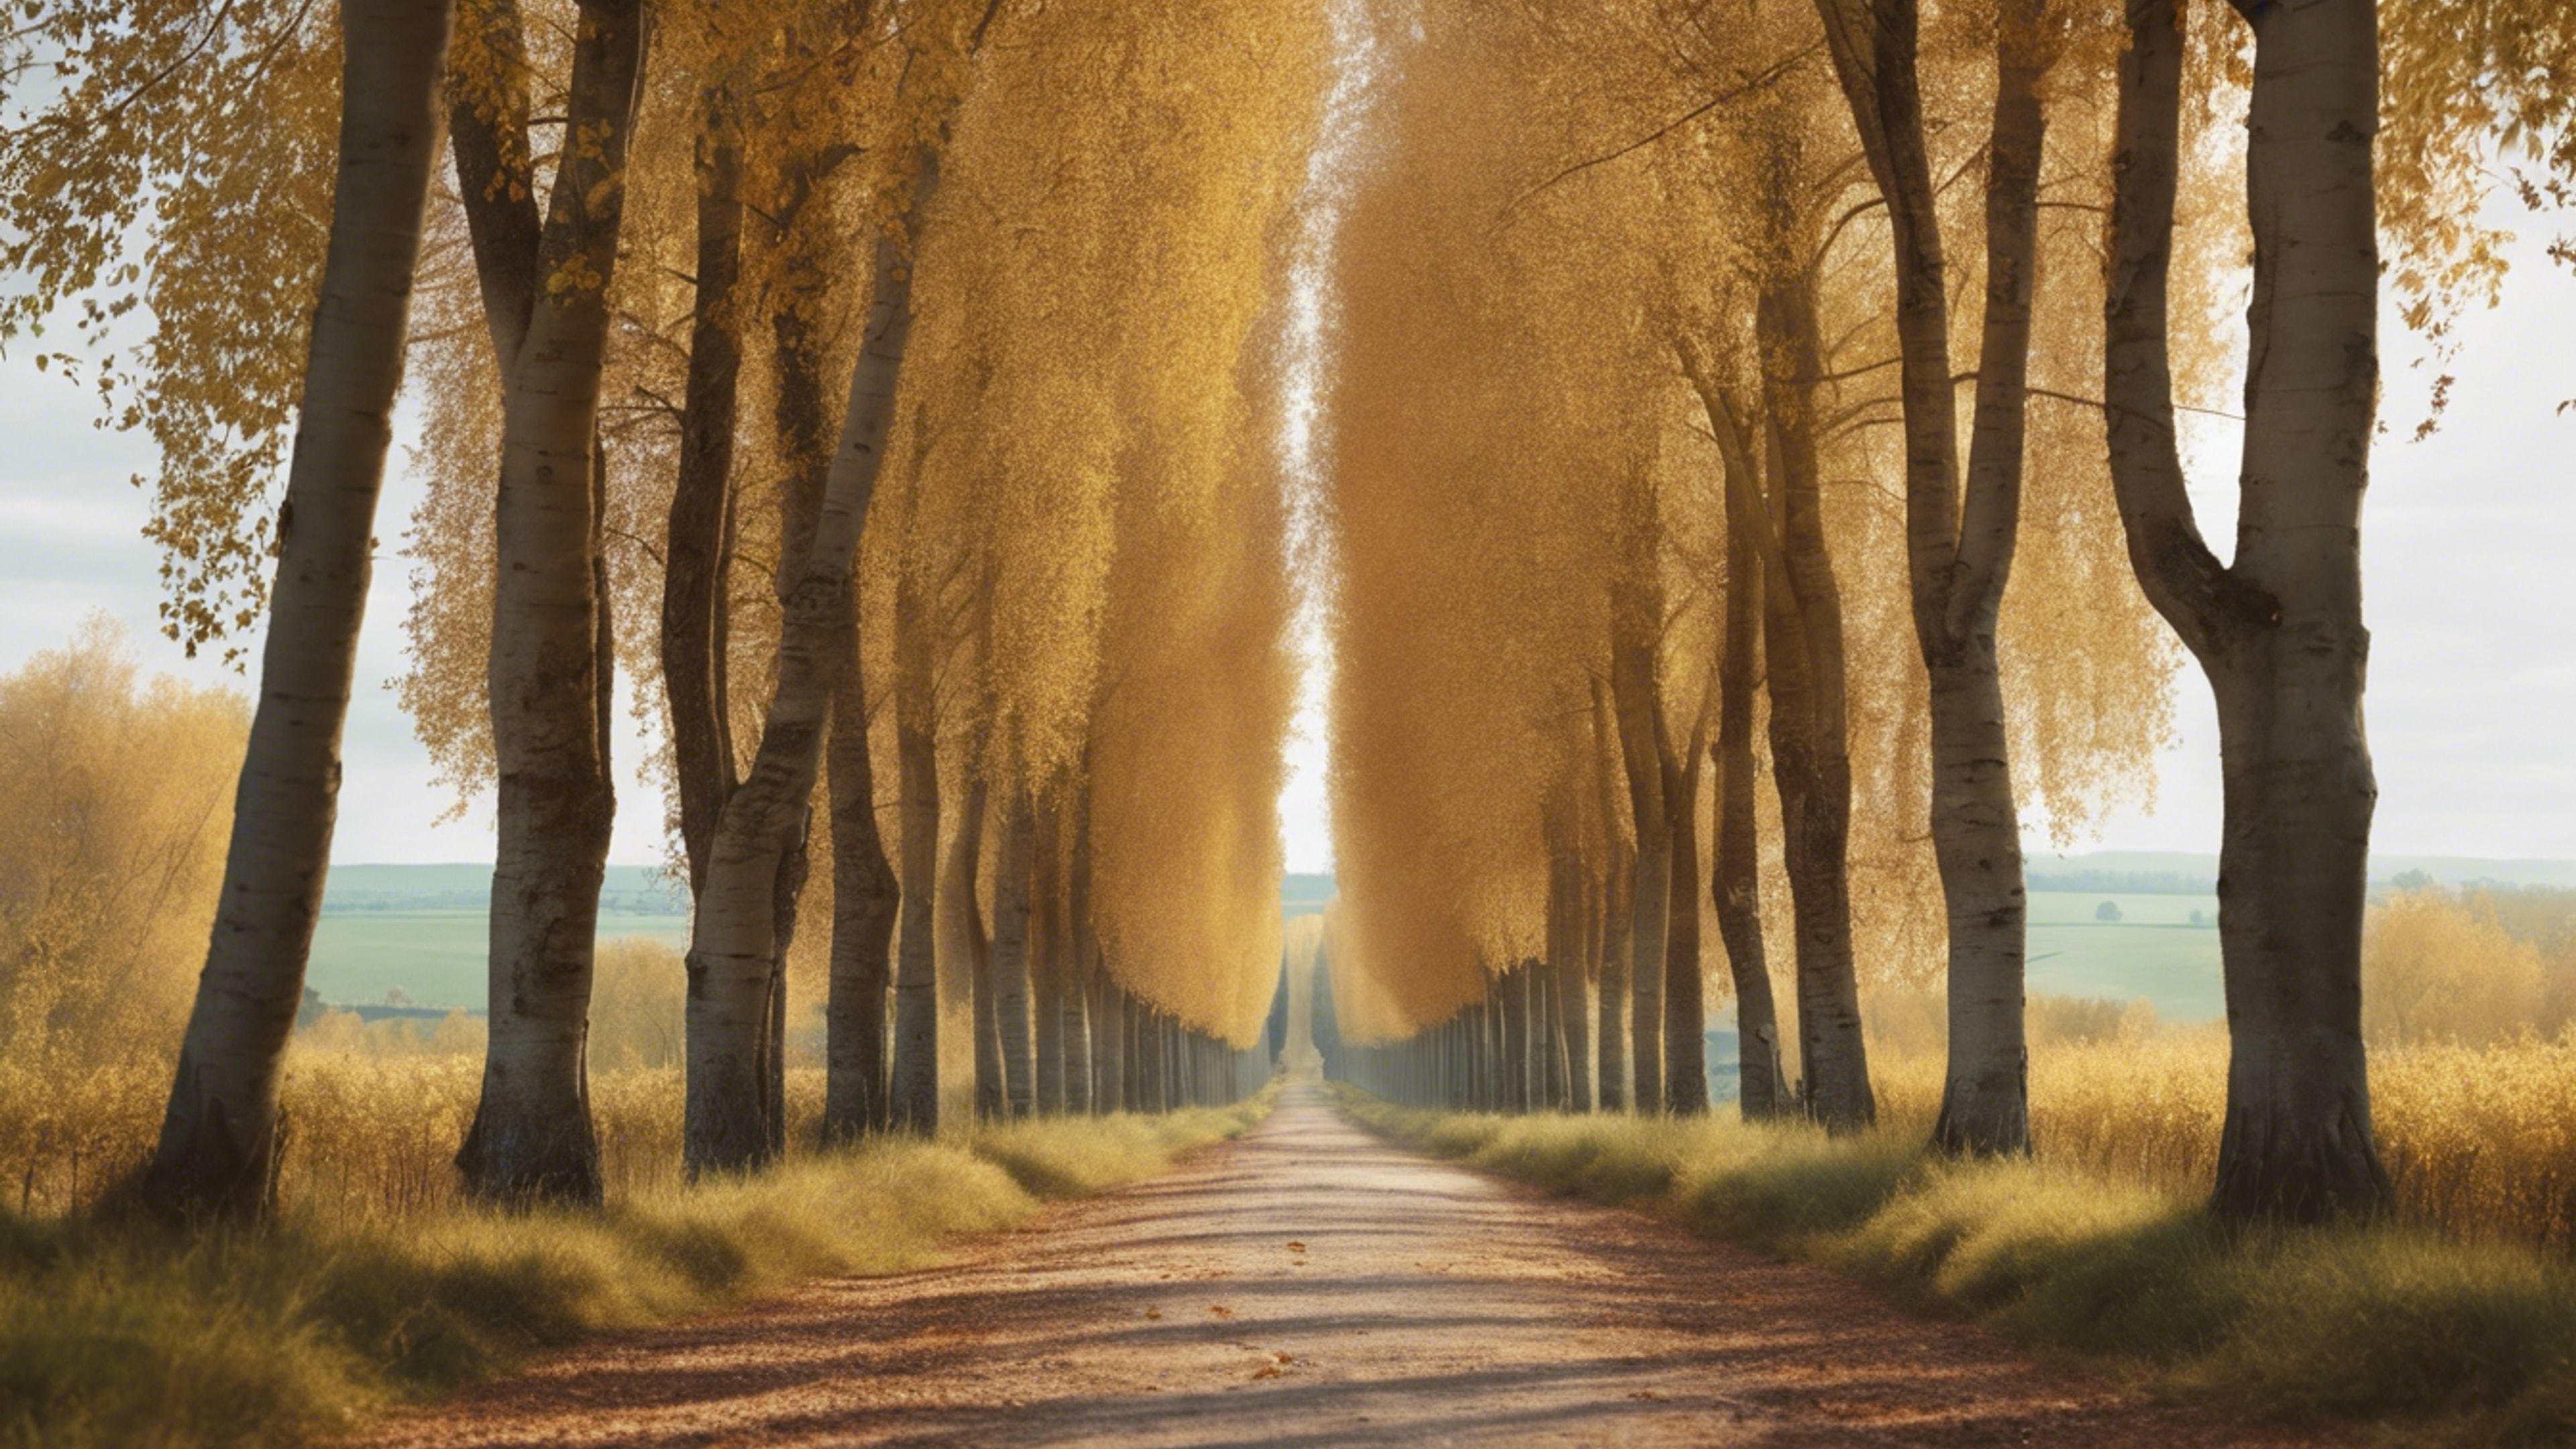 A peaceful French country lane lined with tall, mature poplar trees in autumn. Fond d'écran[76d1ad7093004c7494eb]